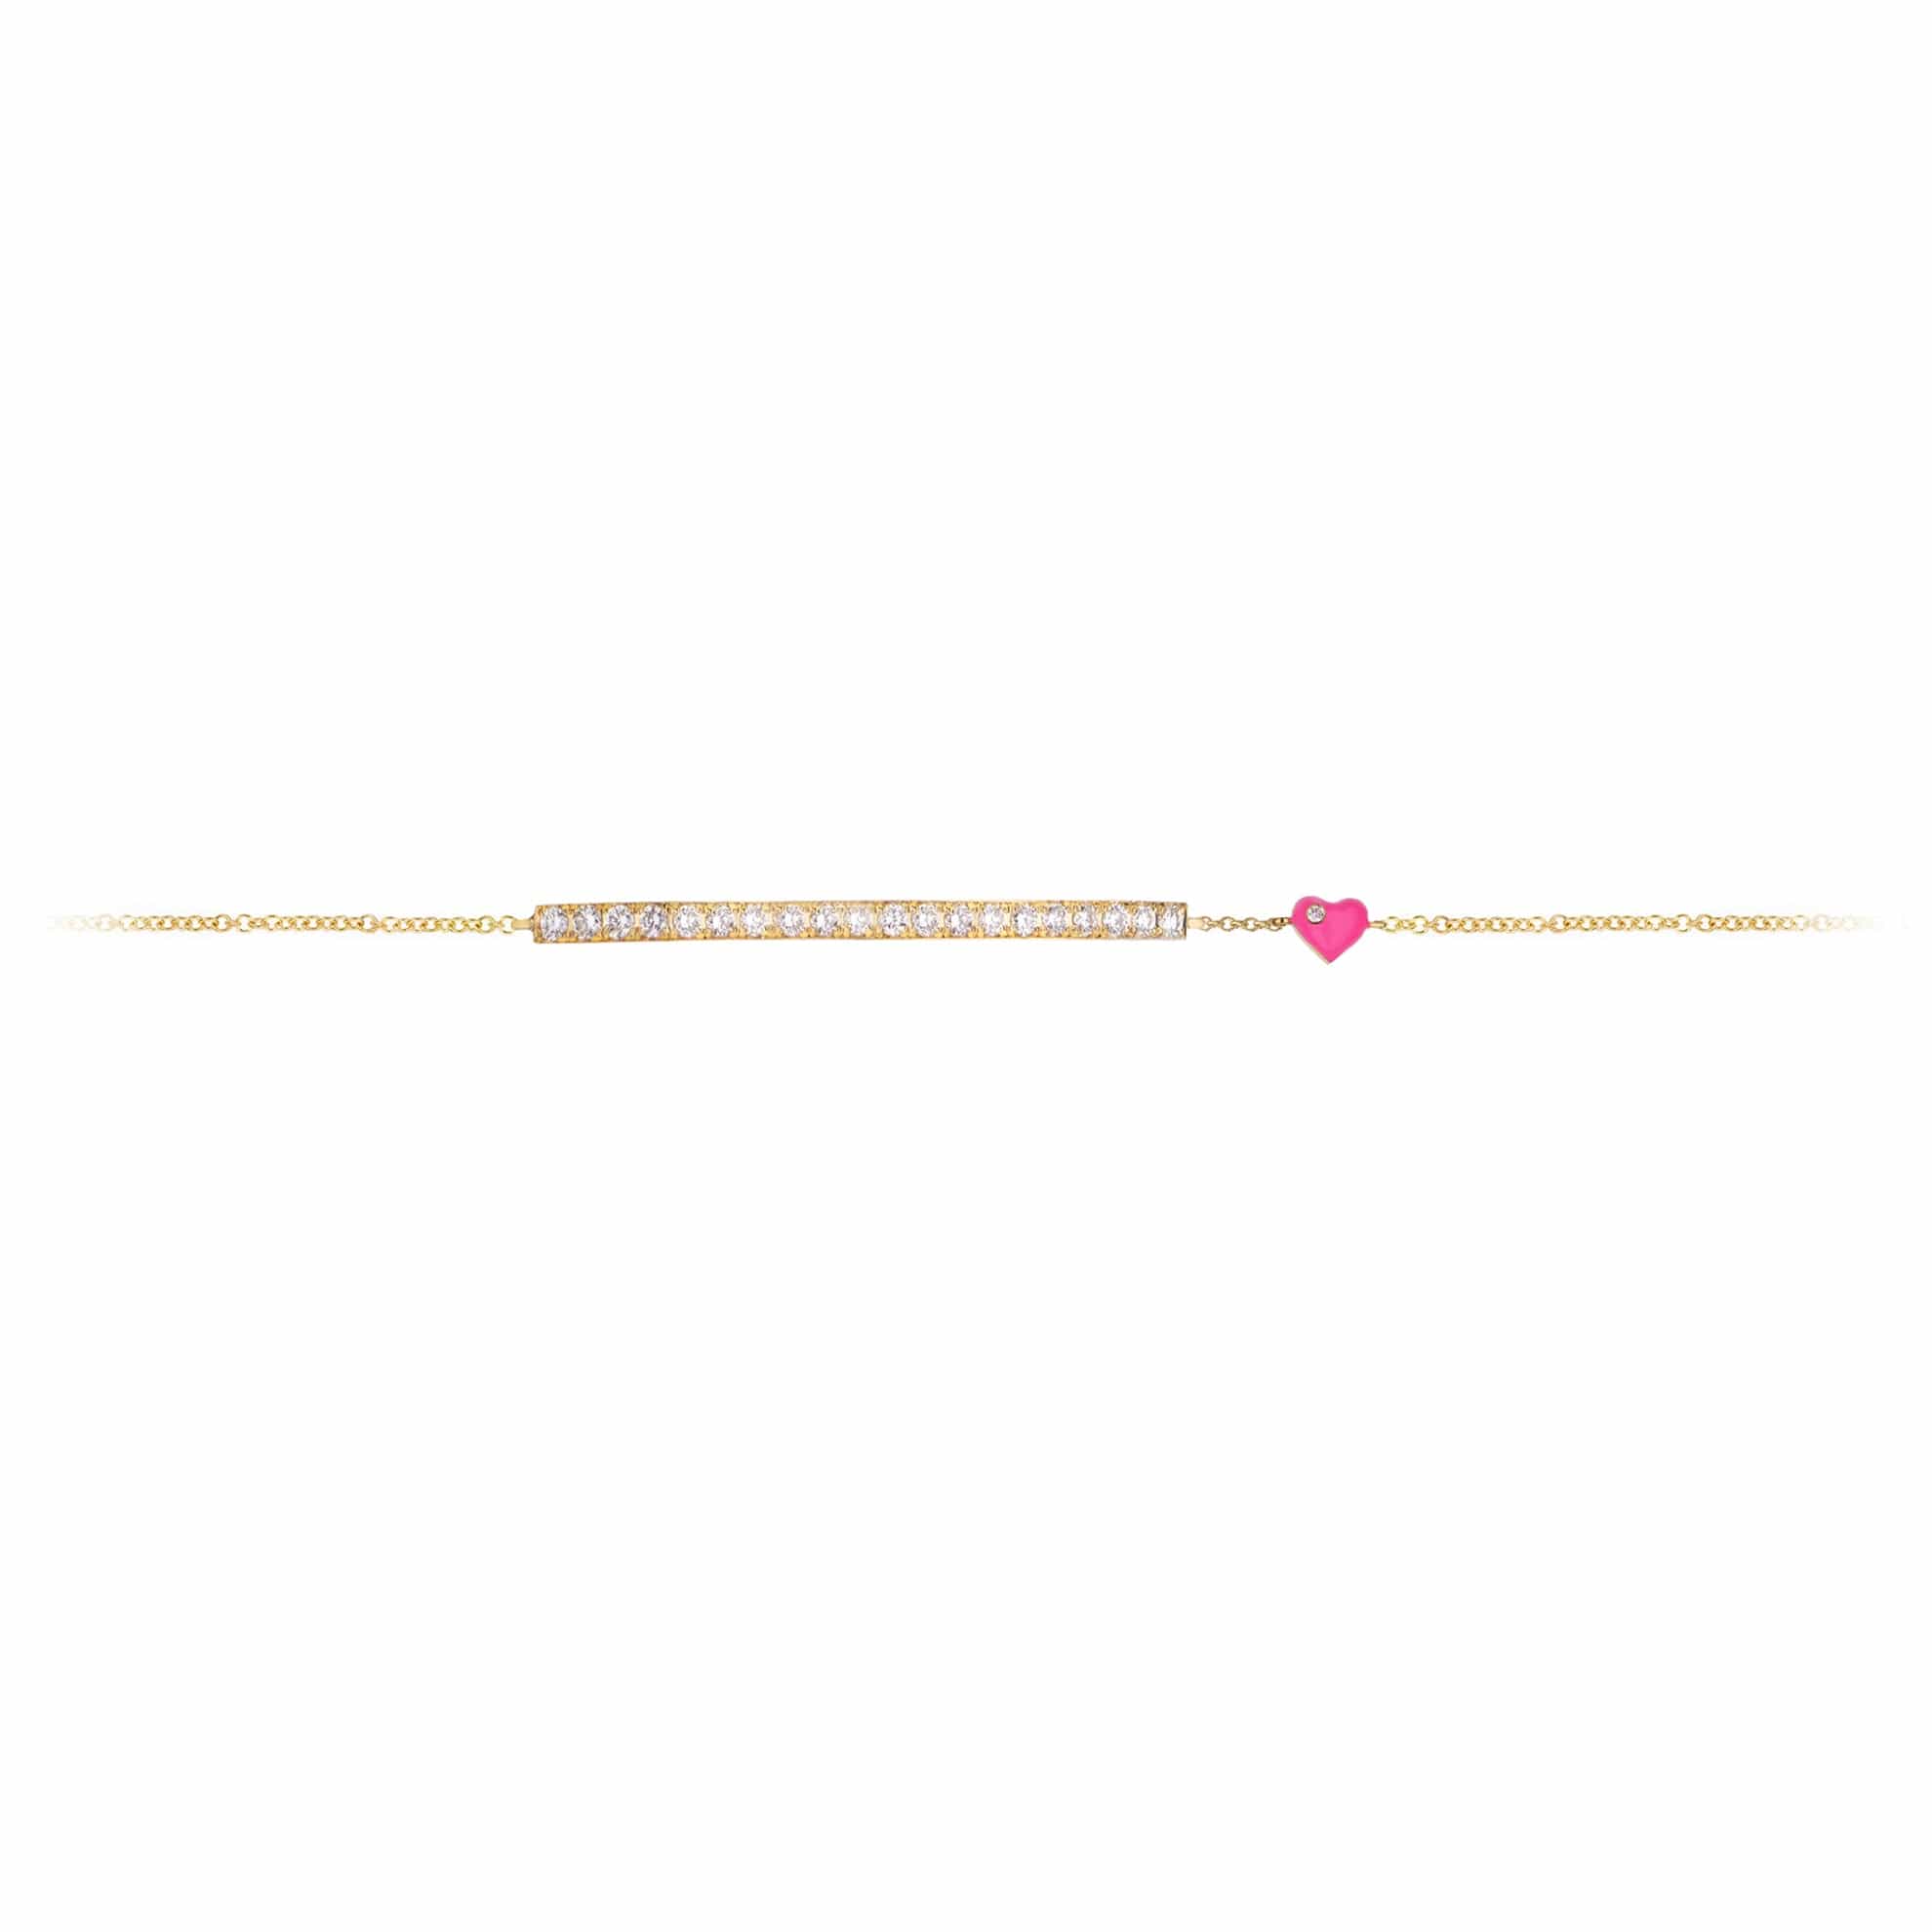 M. Fitaihi Candy Gold Heart Bracelet - M.Fitaihi